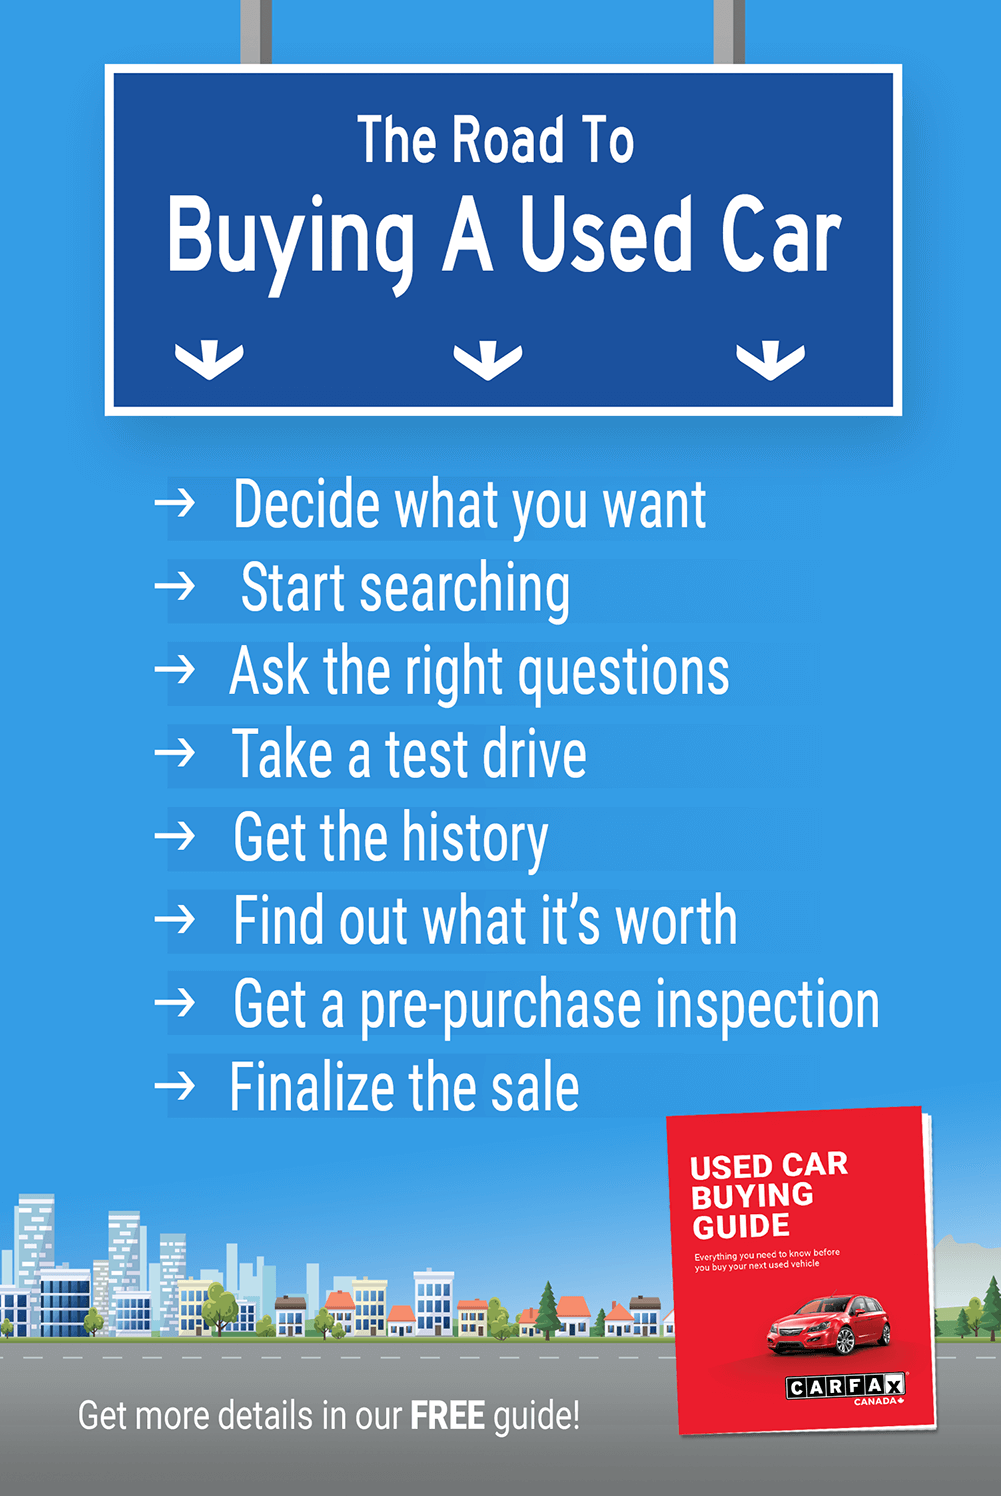 How to buy a new car essay